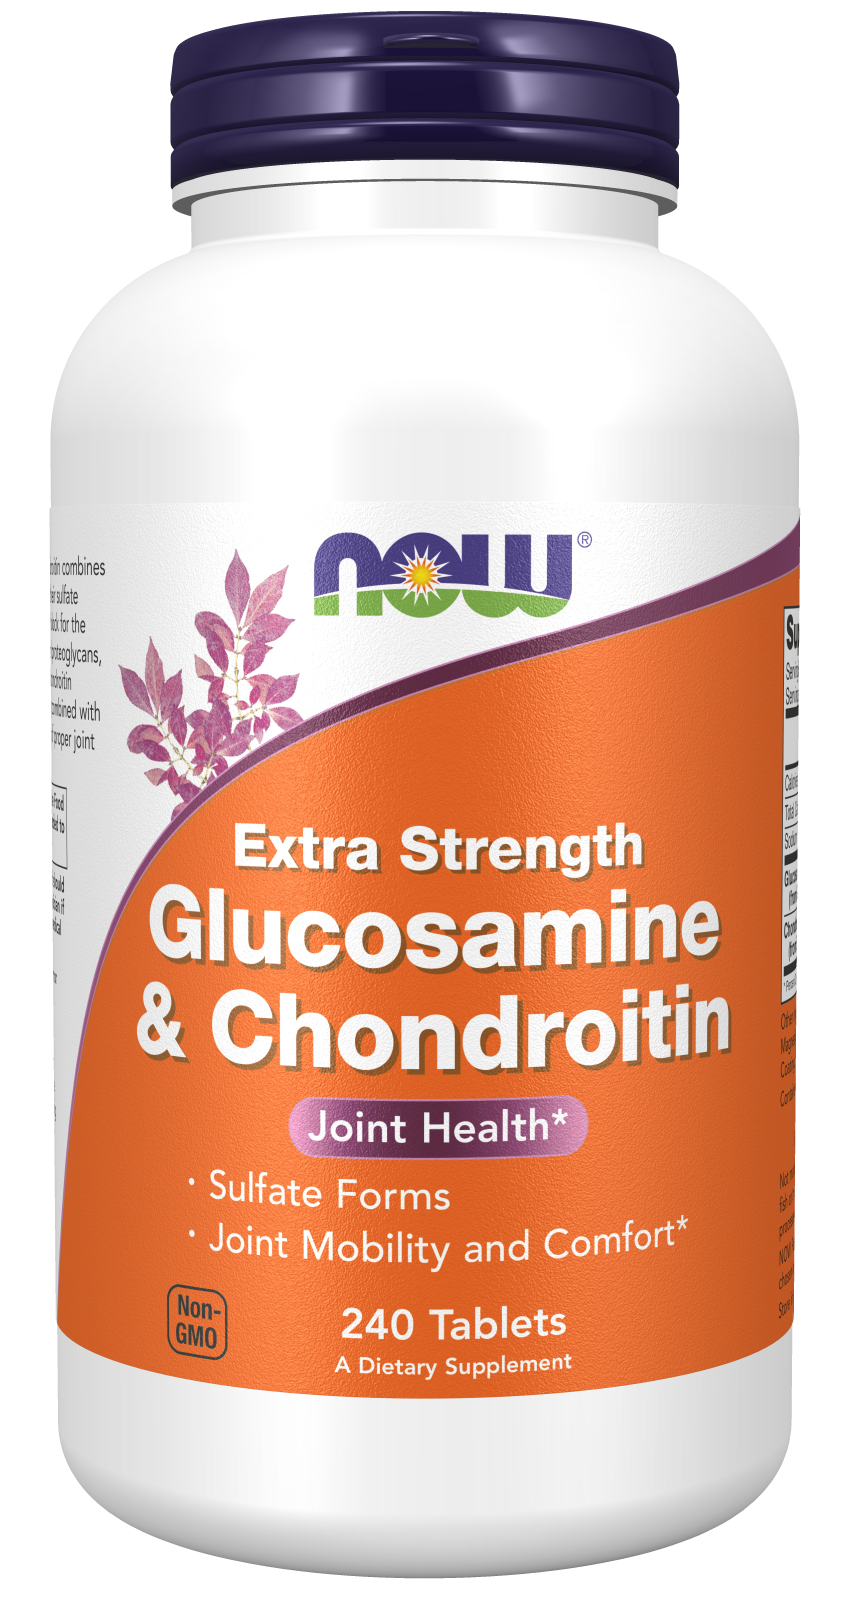 Glucosamine & Chondroitin Extra Strength - 240 Tablets Bottle